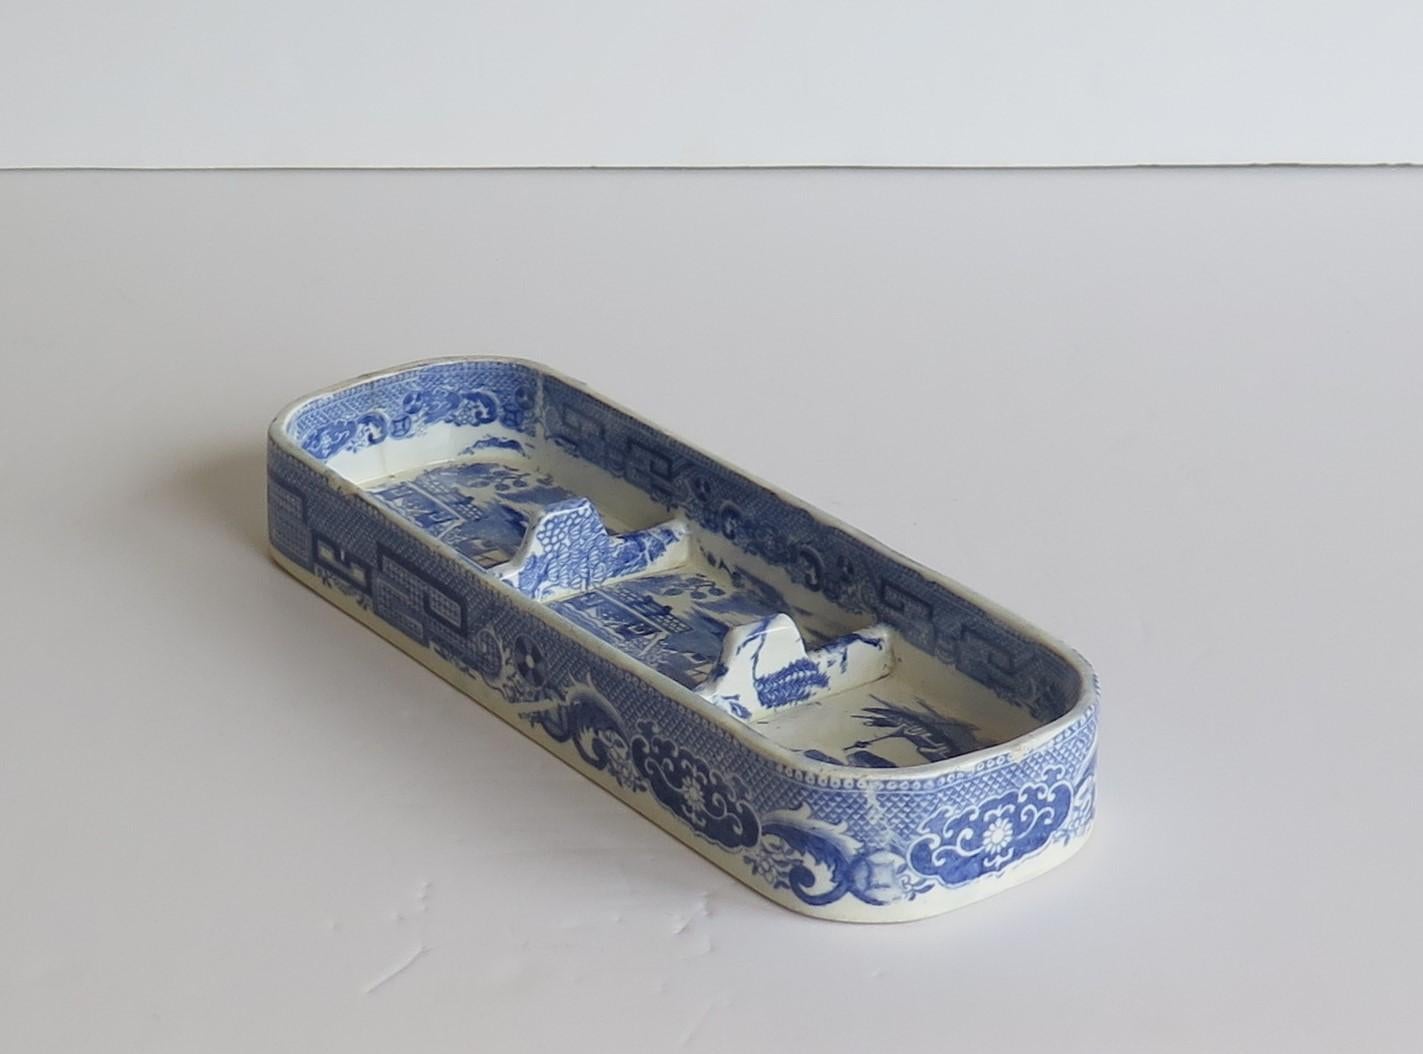 This is a rare Pearlware pottery pen tray decorated in a printed Blue and White willow pattern, produced by the Josiah Spode factory, Stoke on Trent, England, made in the later years of the 18th century, circa 1790-1800.

The tray is potted in